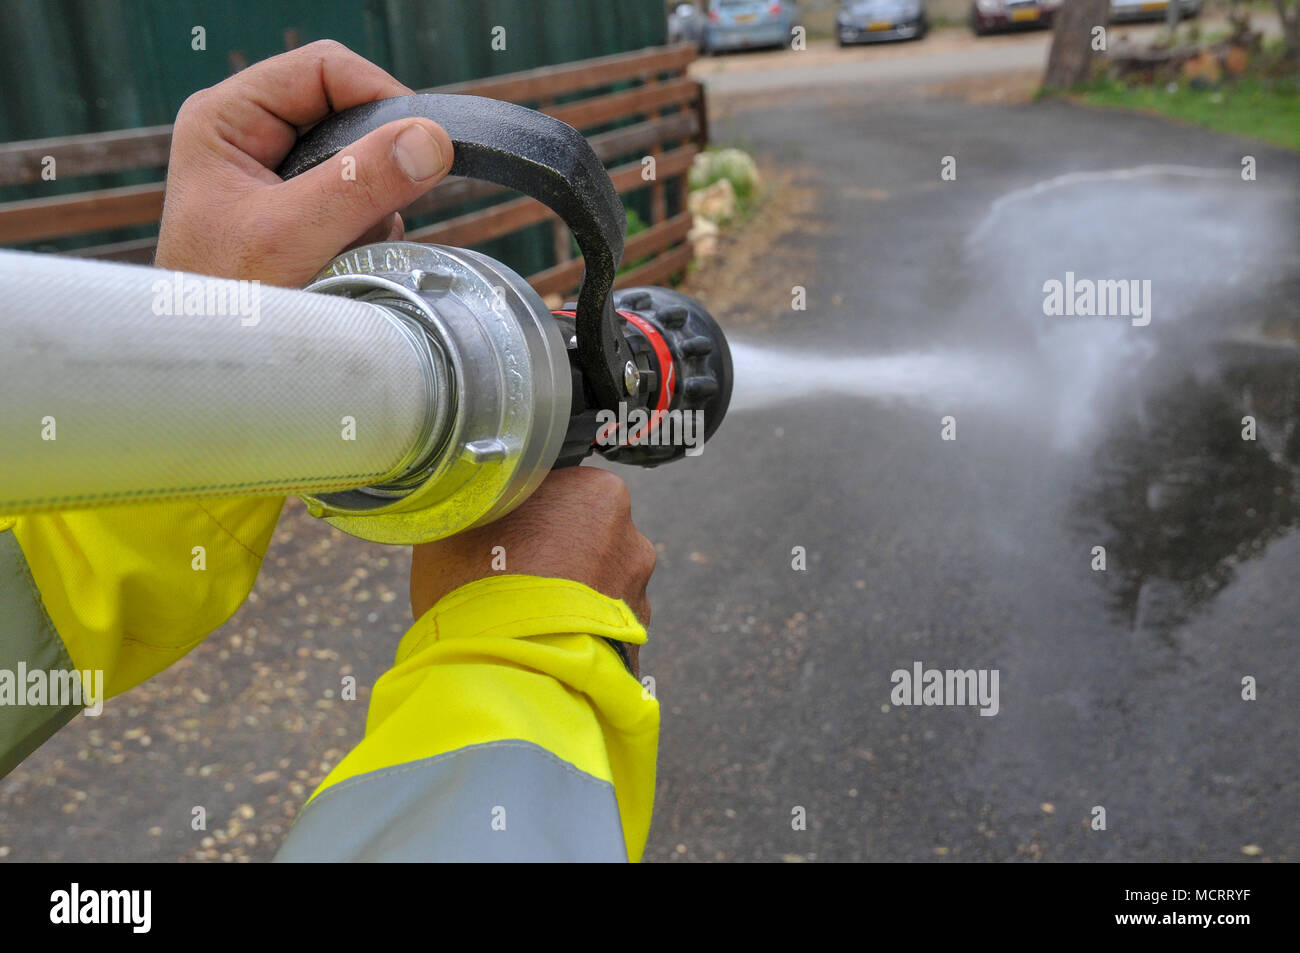 Fireman in protective clothing extinguishes a fire as part of a fire fighting drill Stock Photo